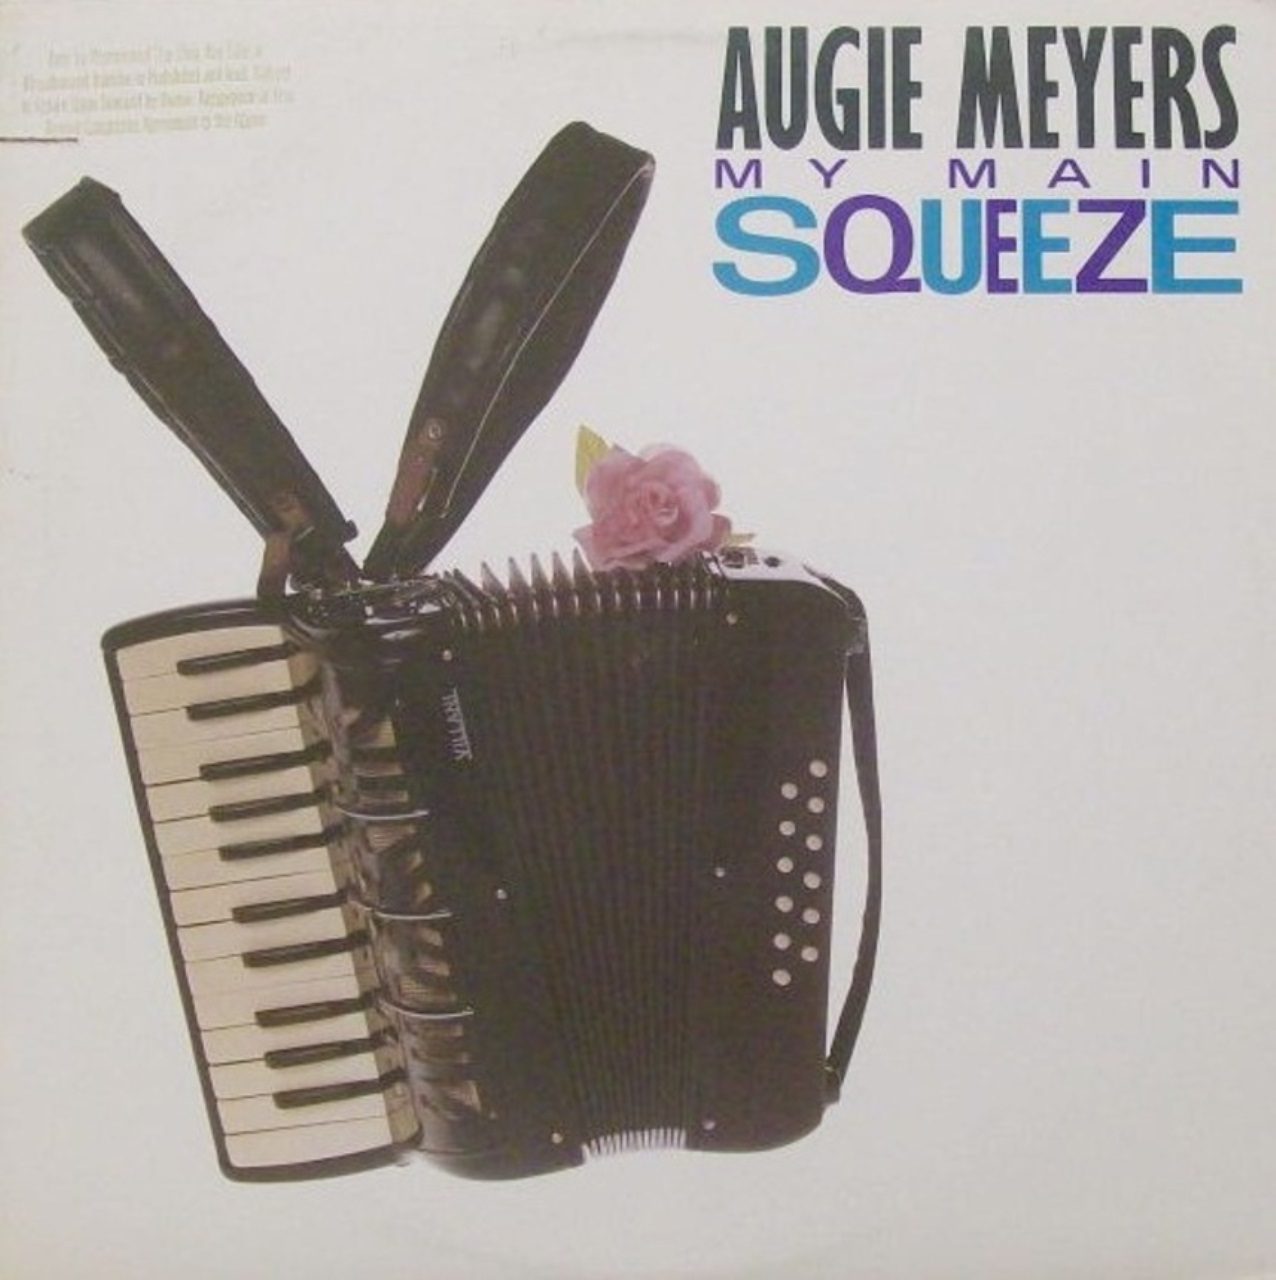 Augie Myers – My Main Squeeze cover album